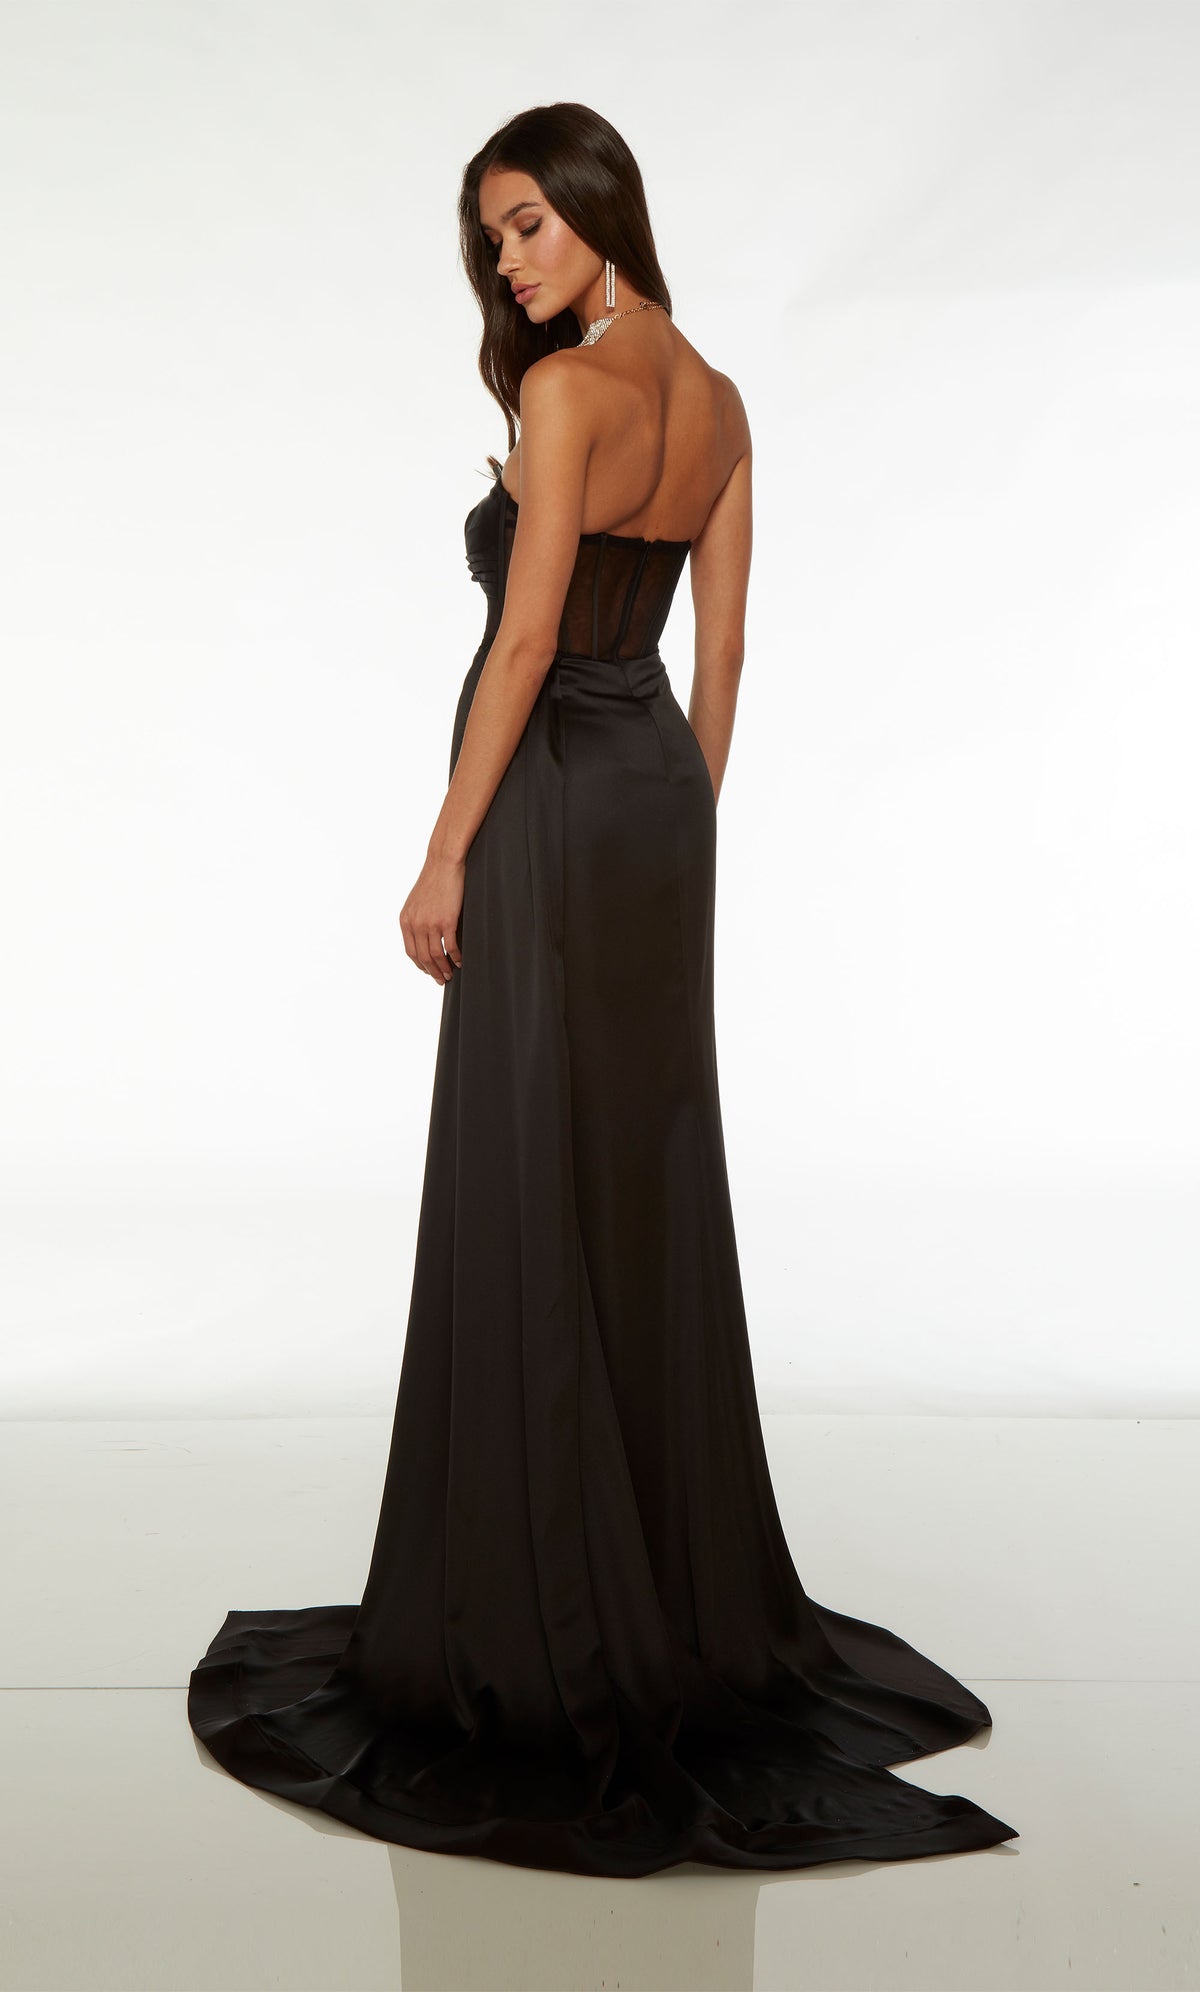 Edgy black evening gown with strapless neckline, sheer corset bodice, high side slit, train, and an detachable side train for added dramatic effect.